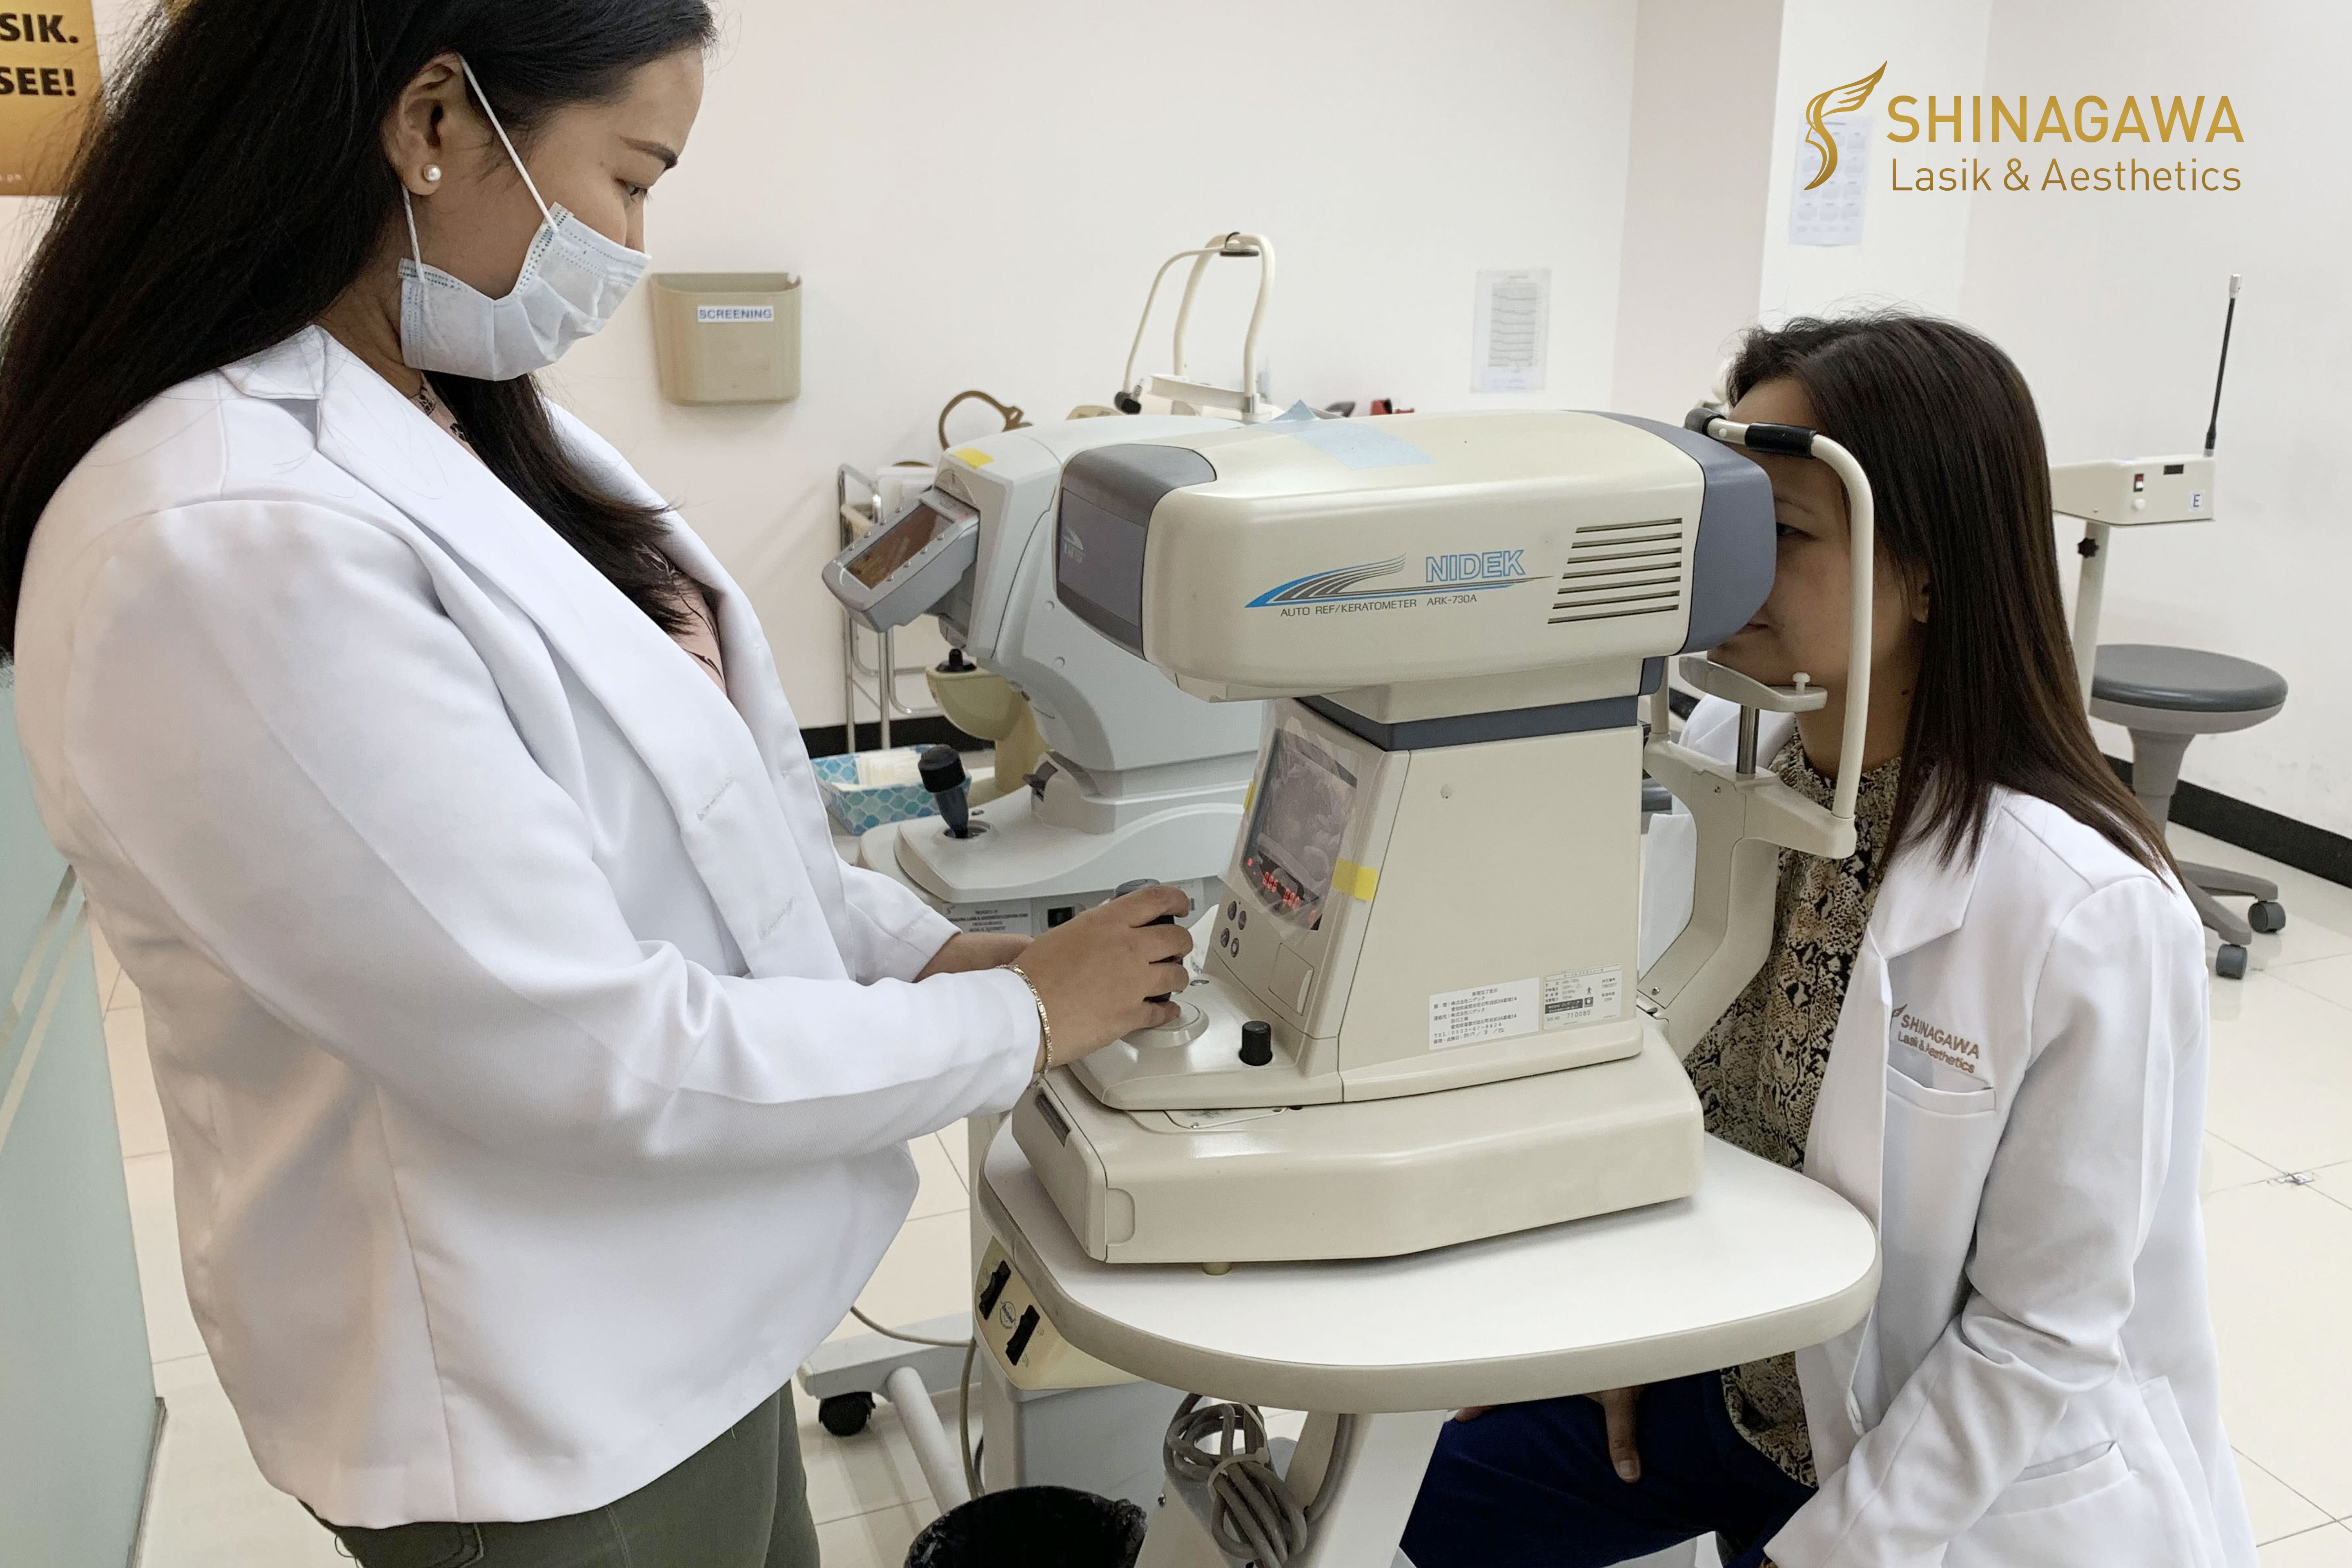 Dr. Charo Rayos del Sol on Her Eye Check Up | Shinagawa Feature Story